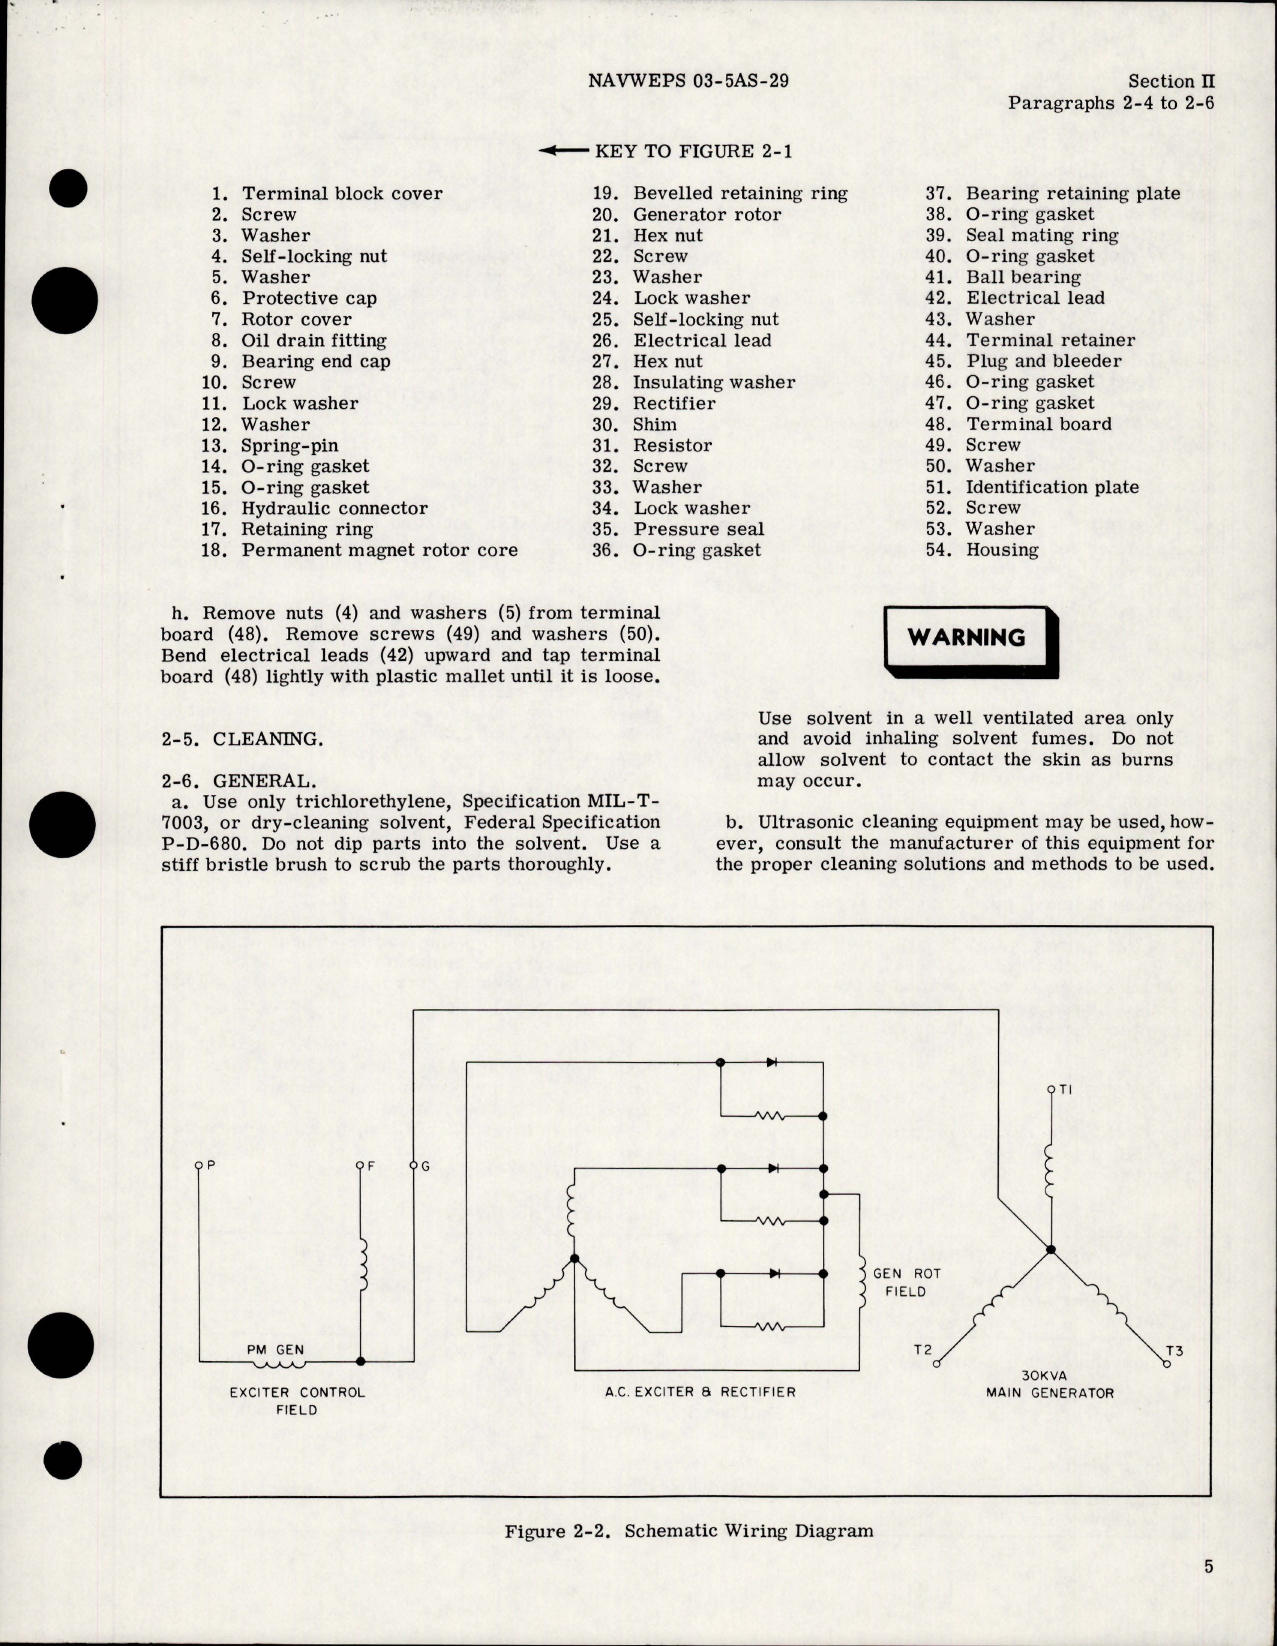 Sample page 9 from AirCorps Library document: Overhaul Instructions for AC Generator - Type 28B187-4-A, 28B187-6-A 